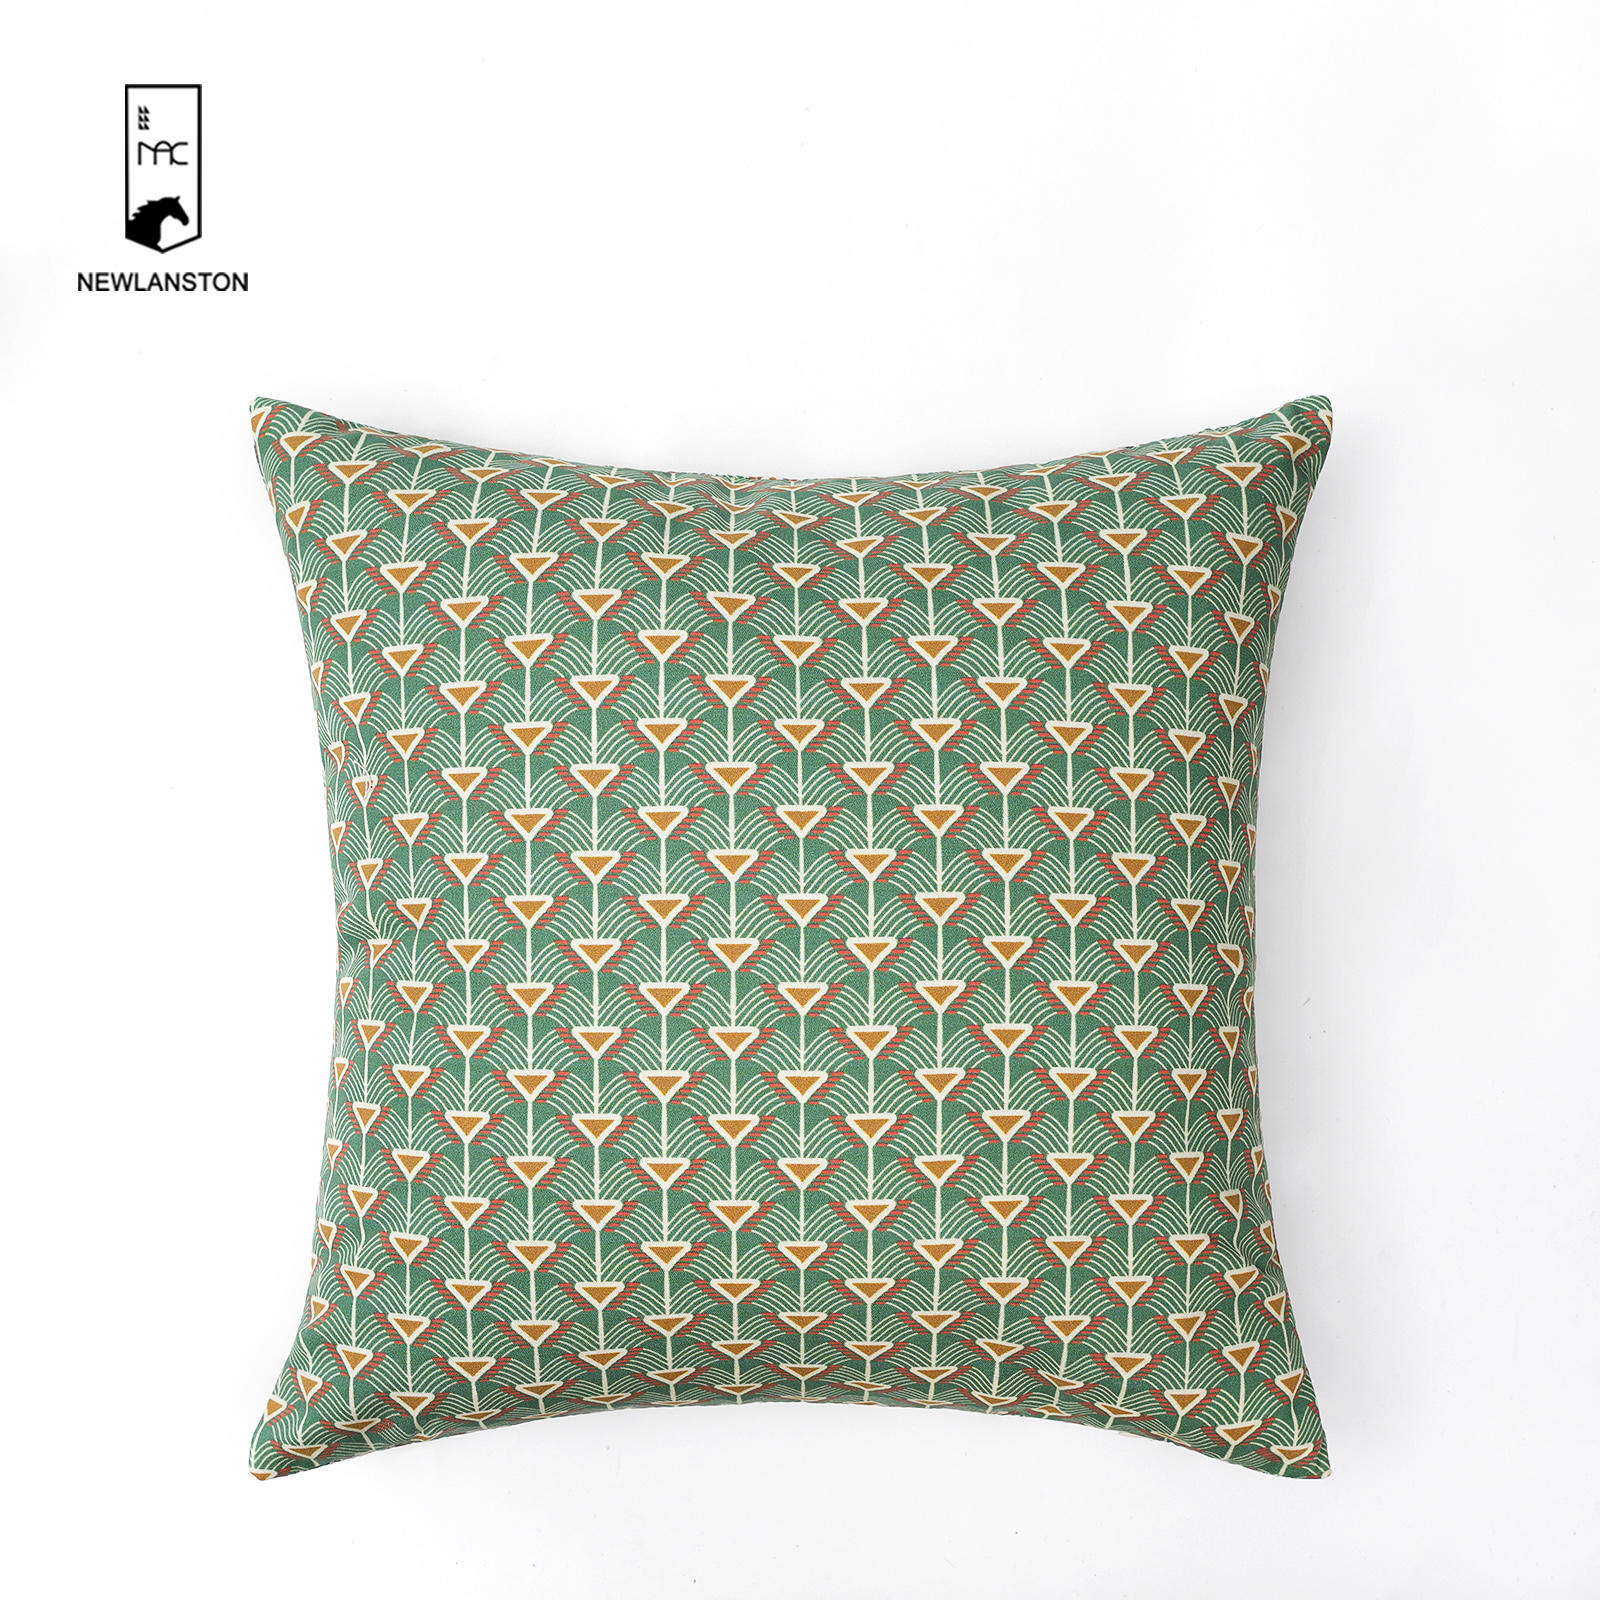  45x45 Digital printed recycled cotton Geometric style Cushion cover